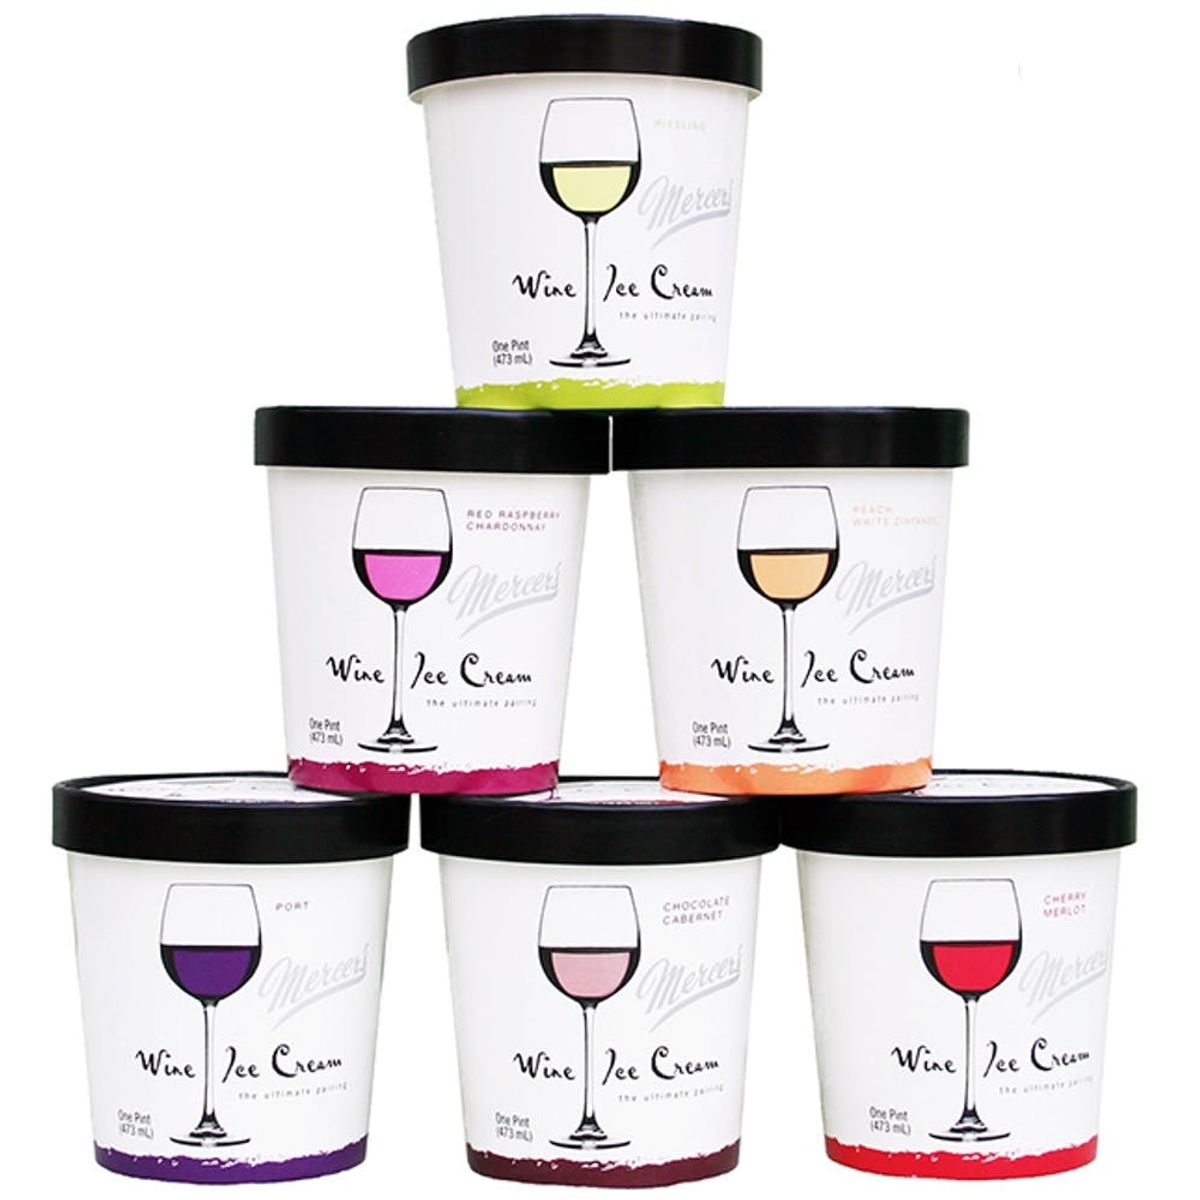 Say It Ain’t Merlot: This Wine Ice Cream Contains 5% Alcohol